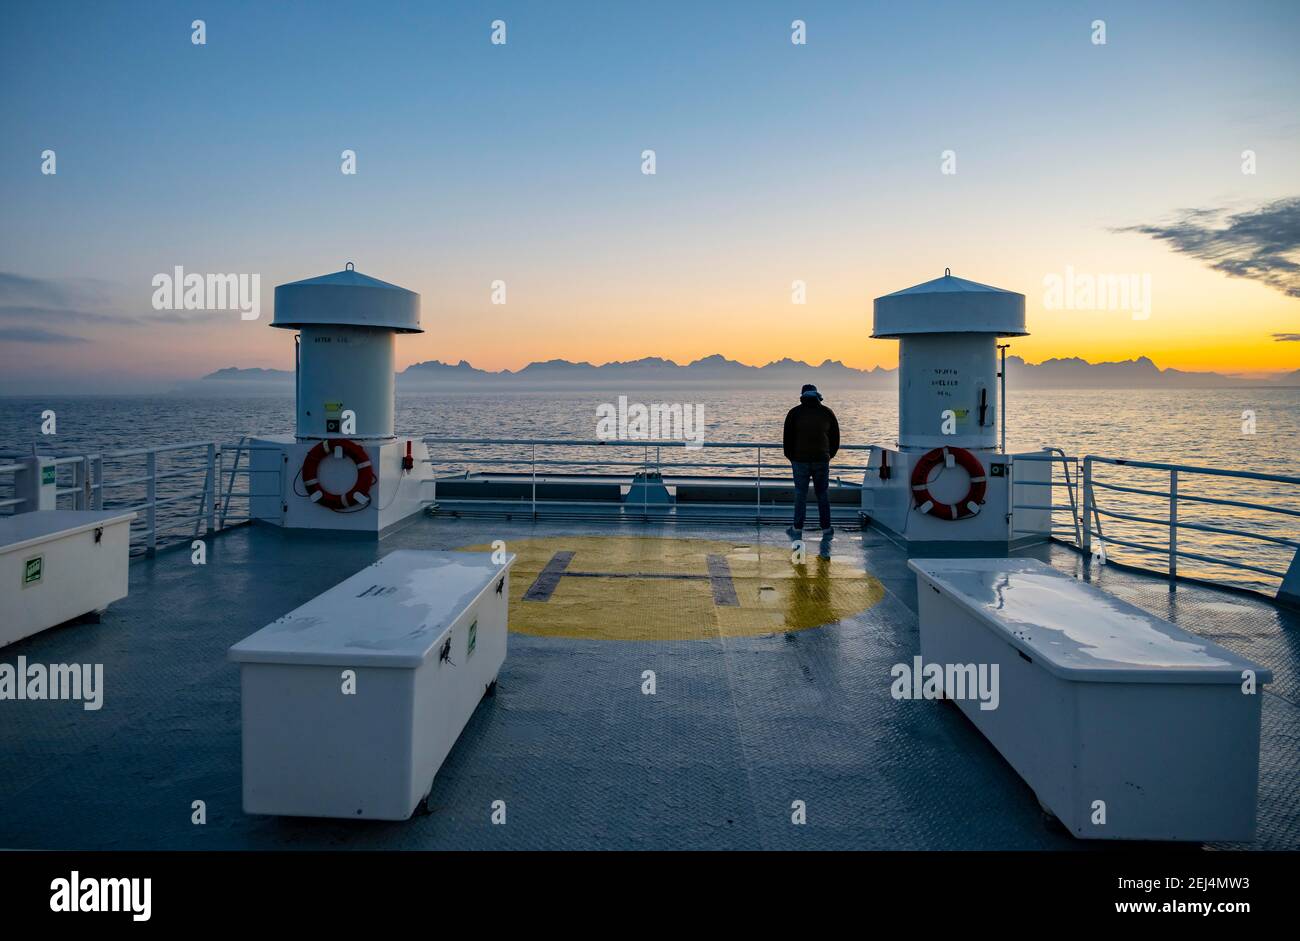 Passenger looking over the ocean, evening mood on ferry in front of silhouette of mountains, Lofoten, Nordland, Norway Stock Photo